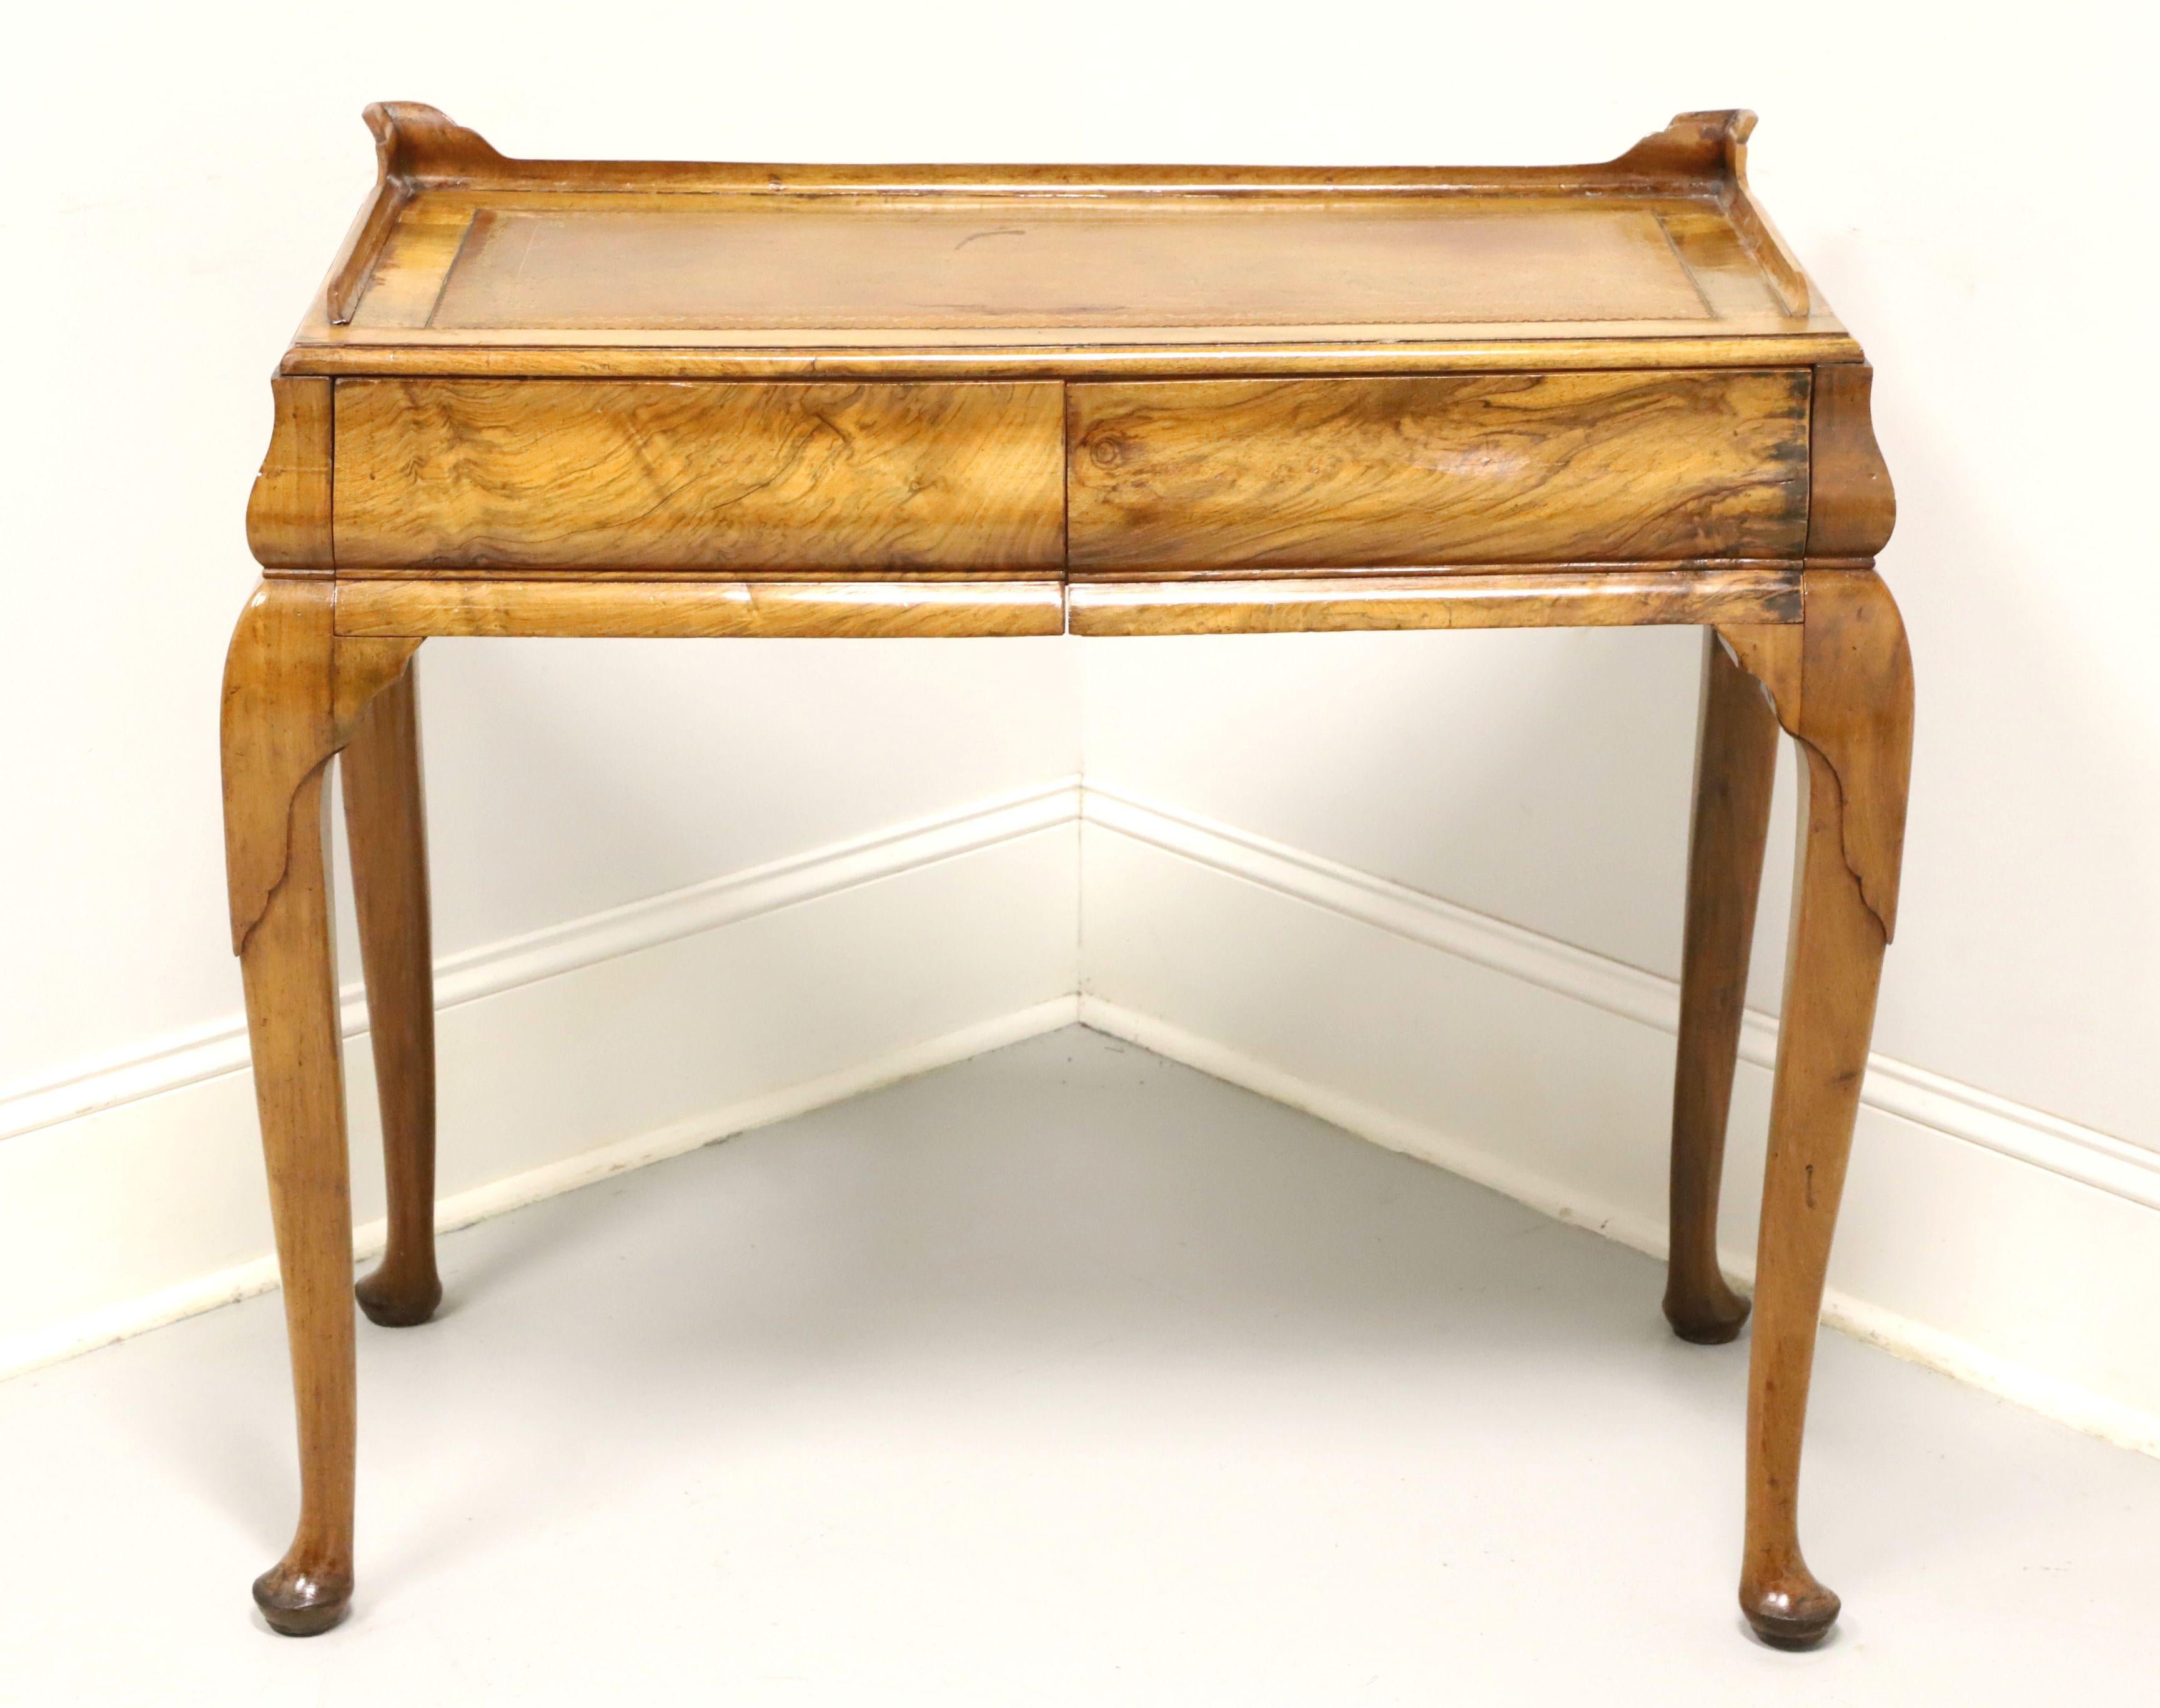 An antique Queen Anne style petite writing desk, unbranded. Solid hardwood, embossed leather top with carved low gallery, carved knees, cabriole legs and pad feet. Features two drawers of dovetail construction. Made in England, circa